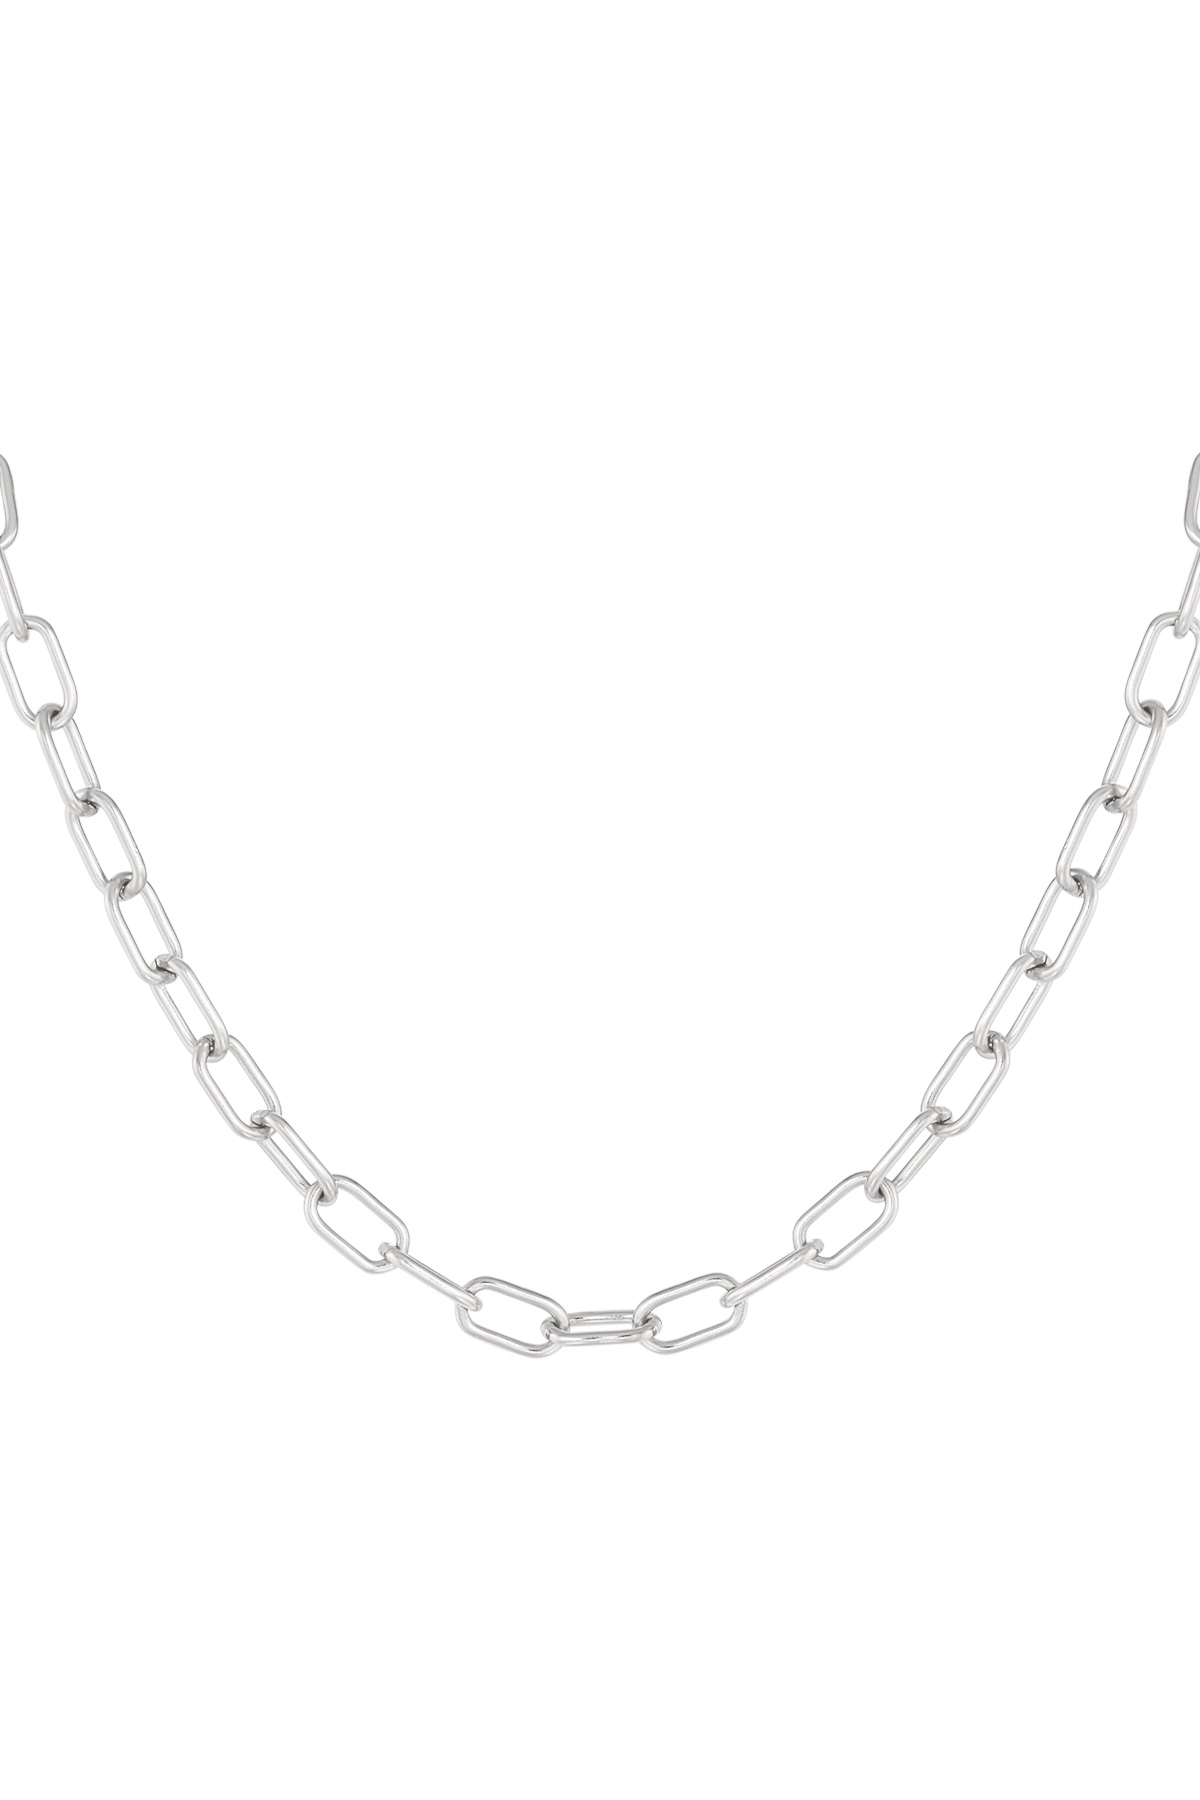 Link chain basic - silver